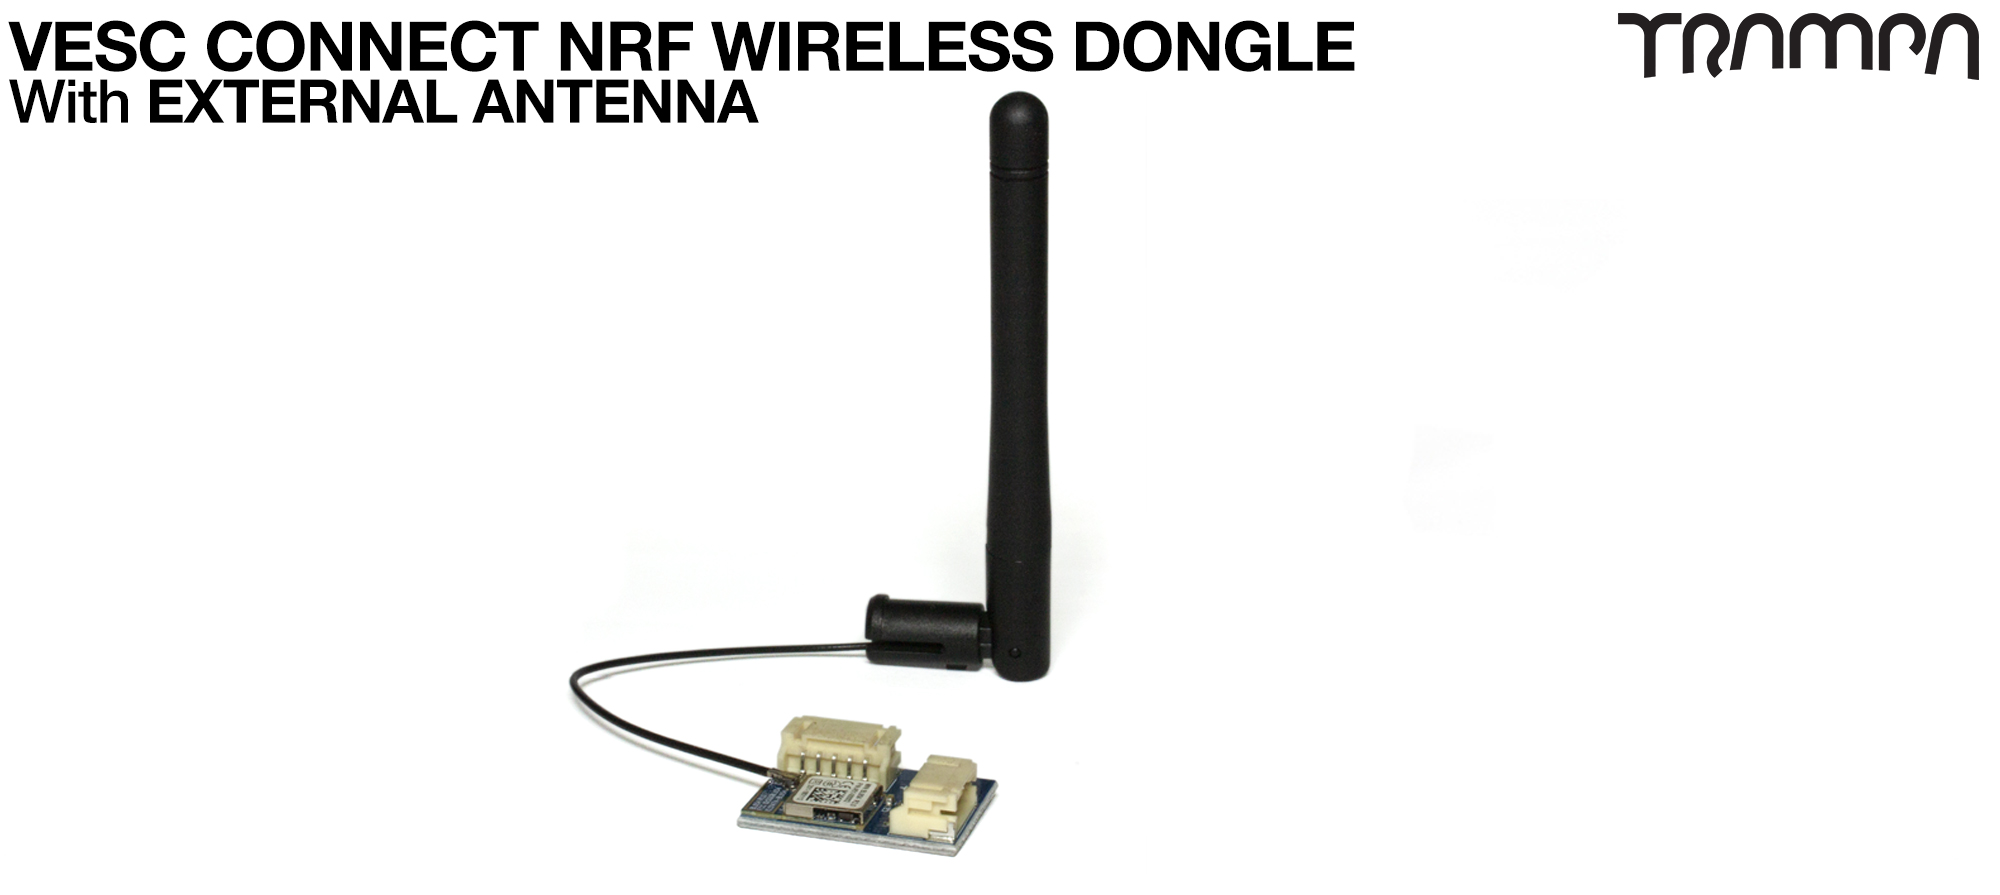 EXTERNAL ARIAL Antenna VESC Connect Dongle (+£32.50) - OUT OF STOCK